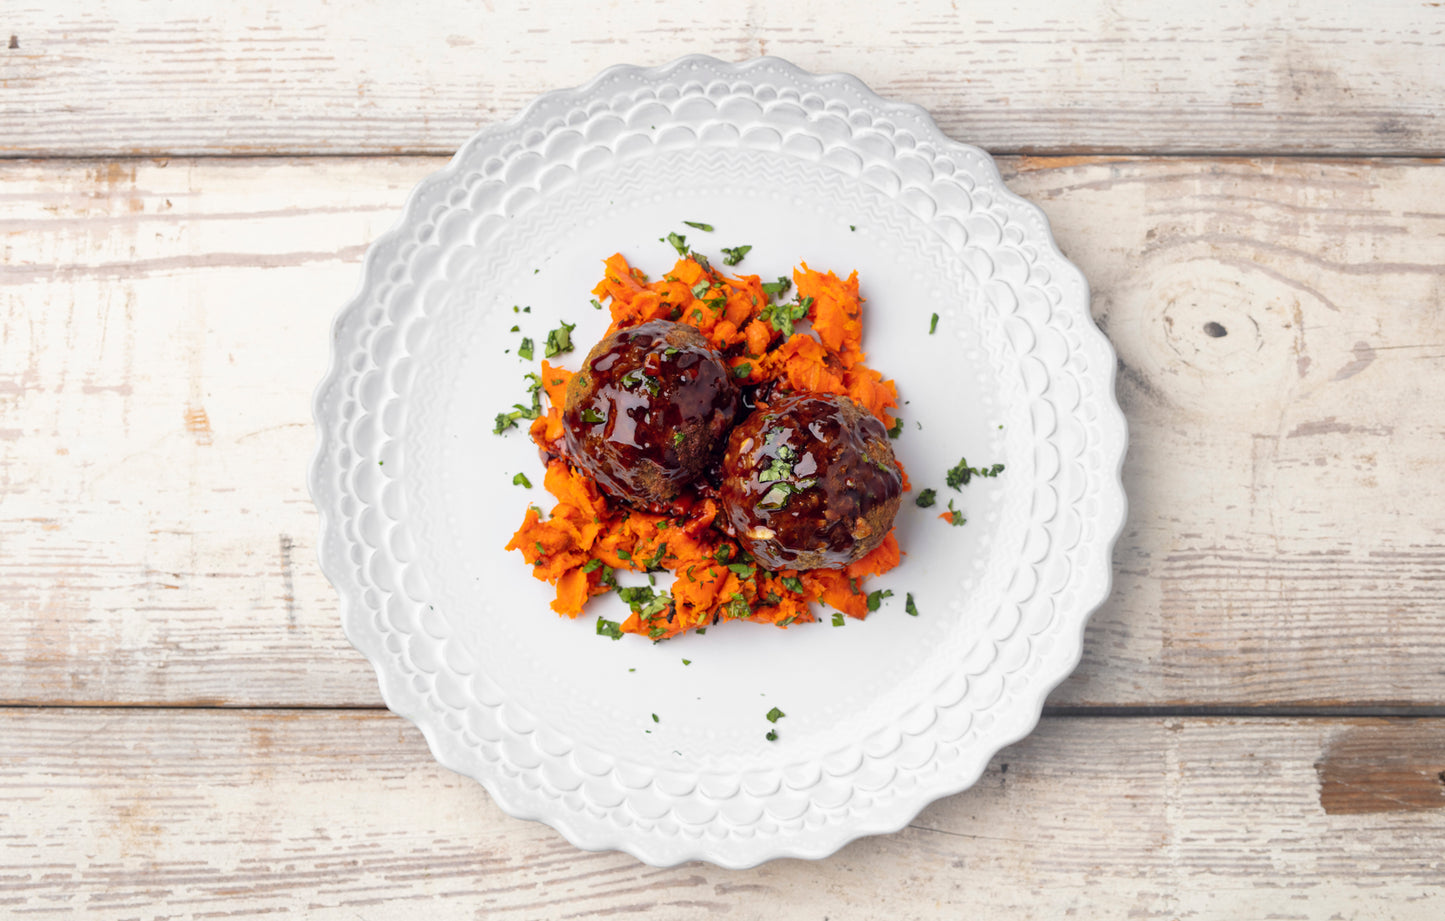 Tandoori Beef Meatballs with Mashed Mint Carrot and Pomegranate Sauce